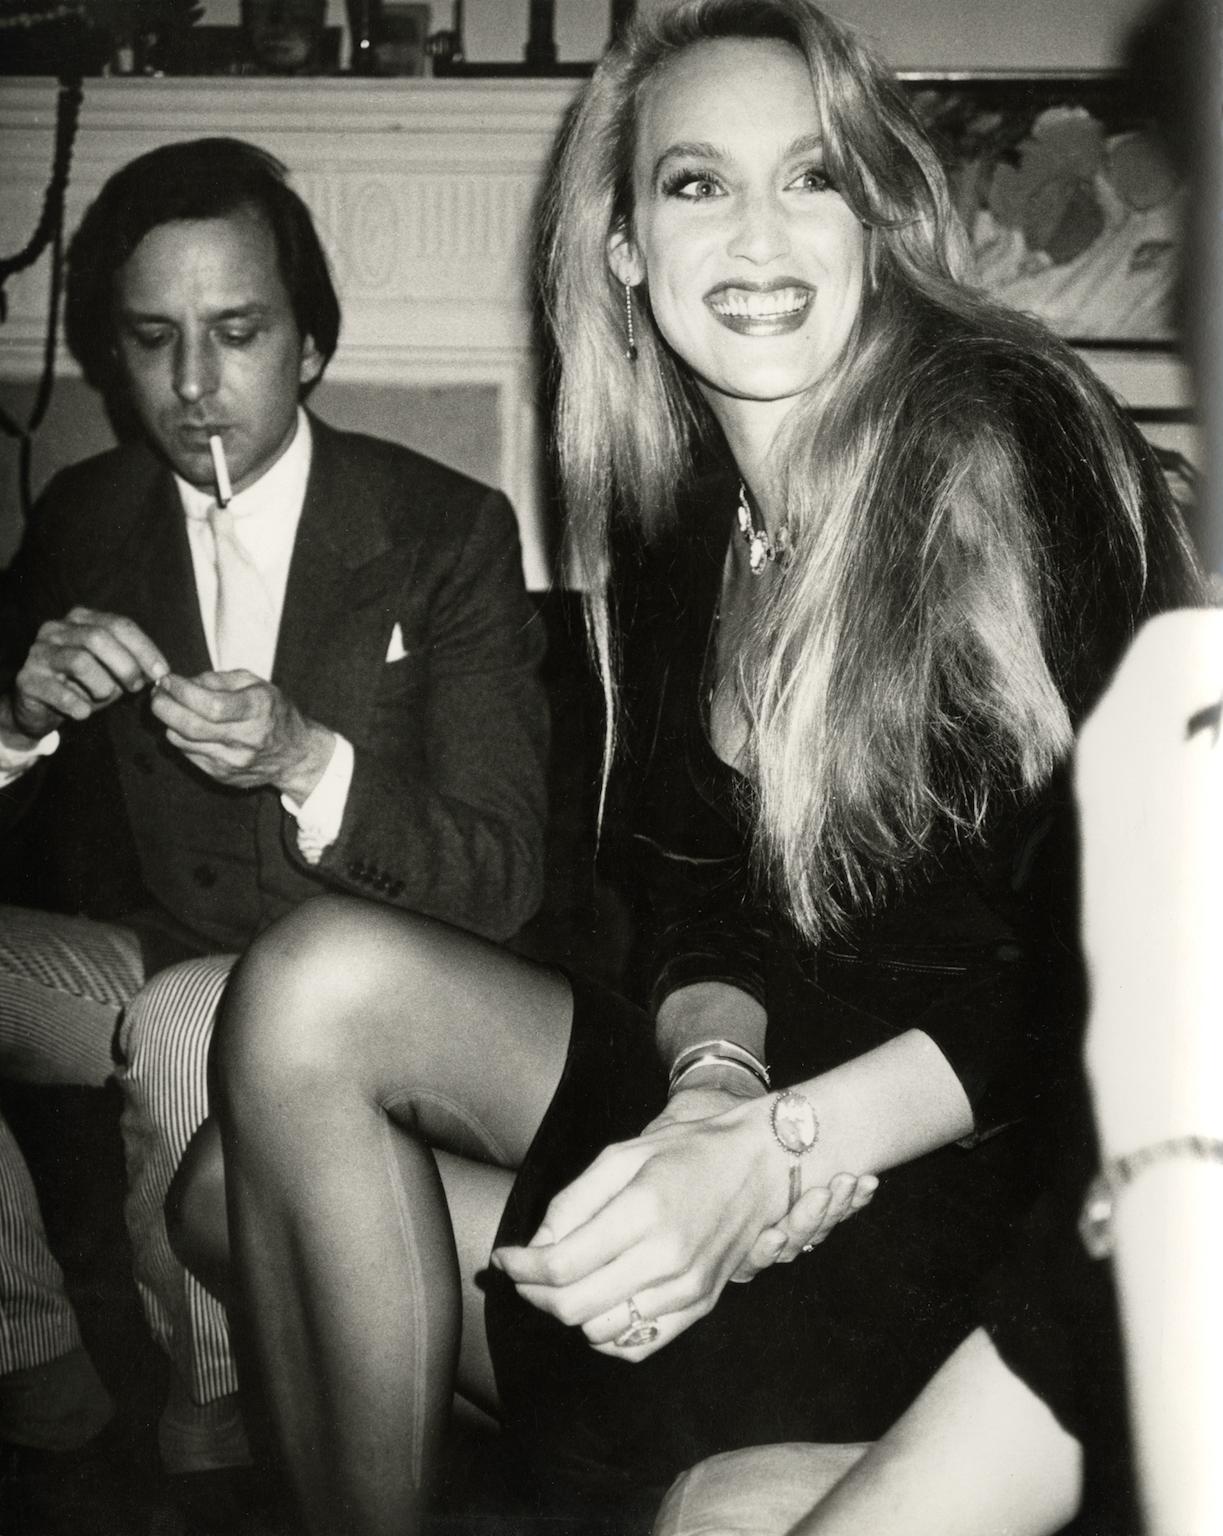 Andy Warhol Portrait Photograph - Fred Hughes and Jerry Hall